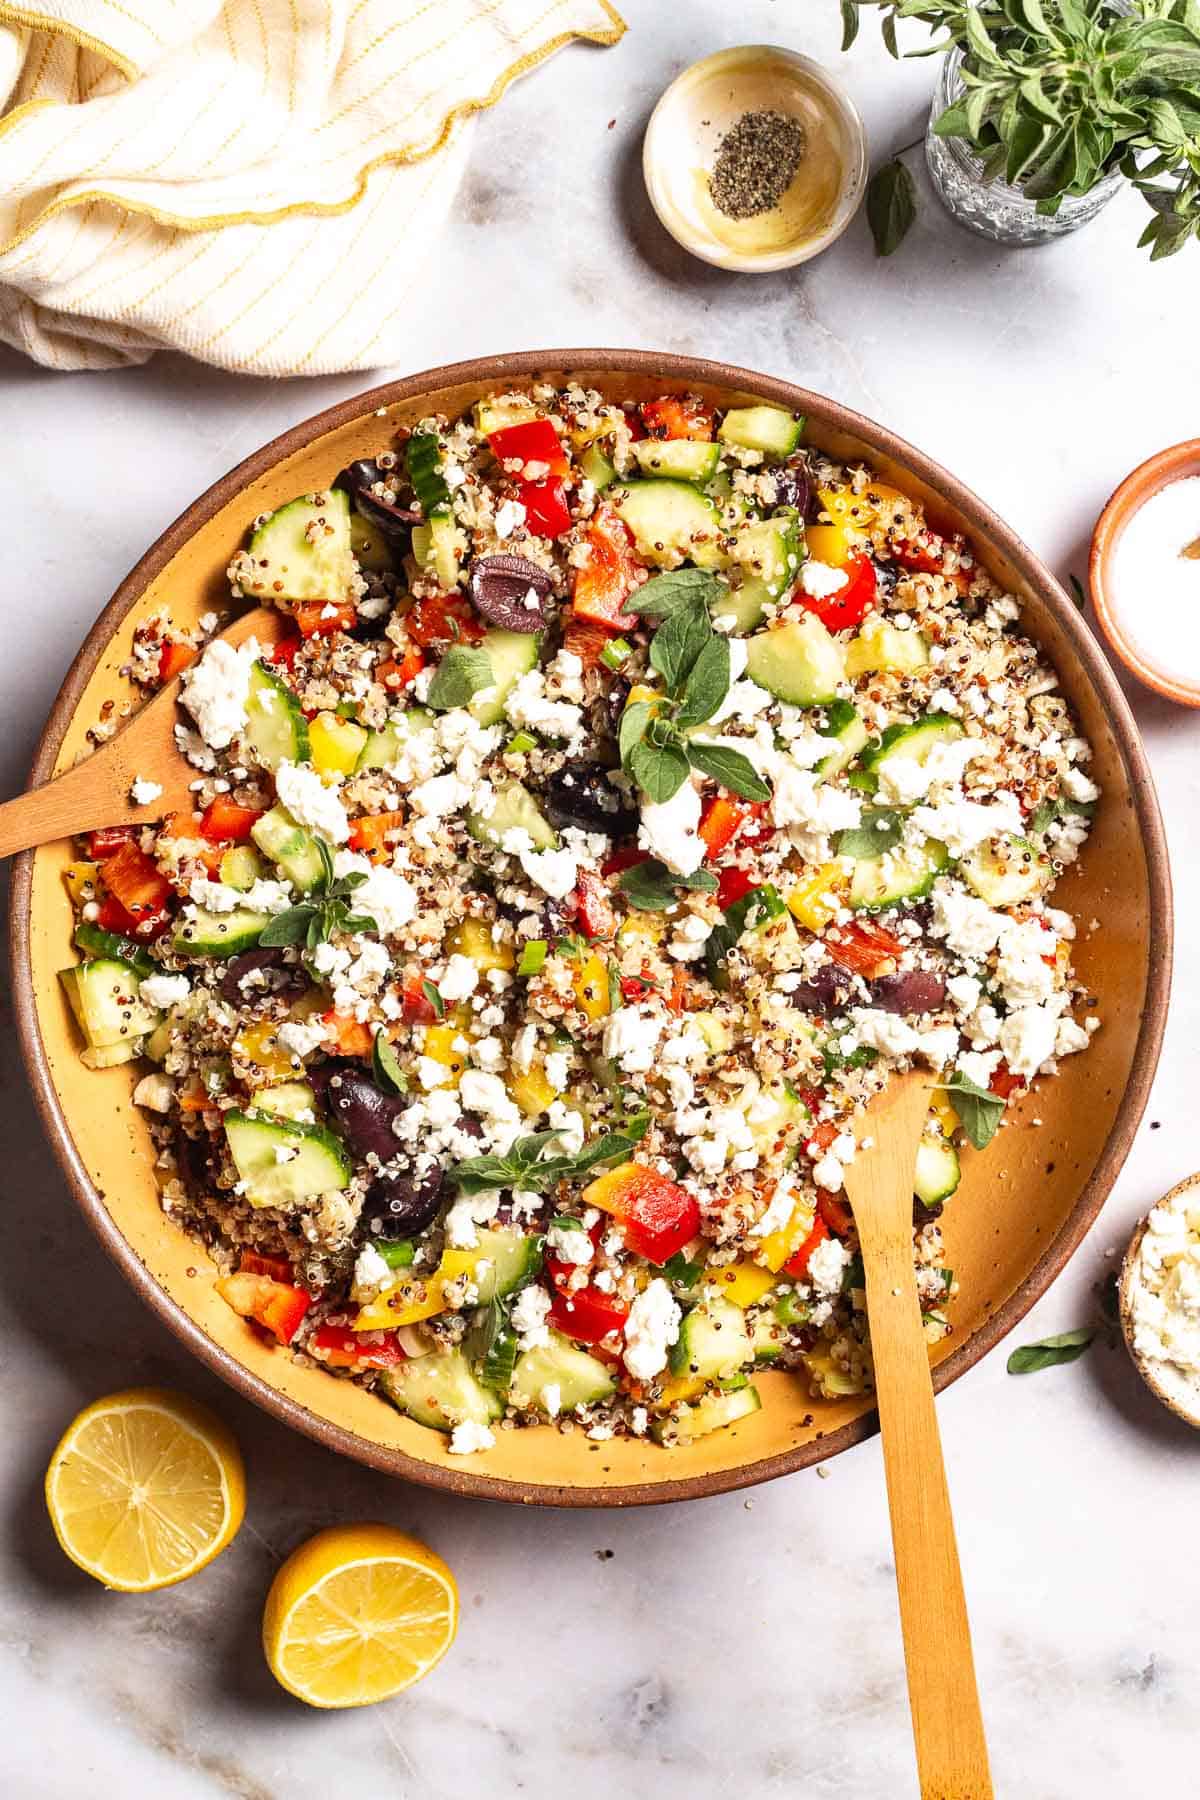 An overhead photo of quinoa salad in a large bowl with wooden serving utensils. This is surrounded by small bowls of feta cheese, salt and pepper as well as 2 lemon halves, a jar of fresh oregano, and a cloth napkin.